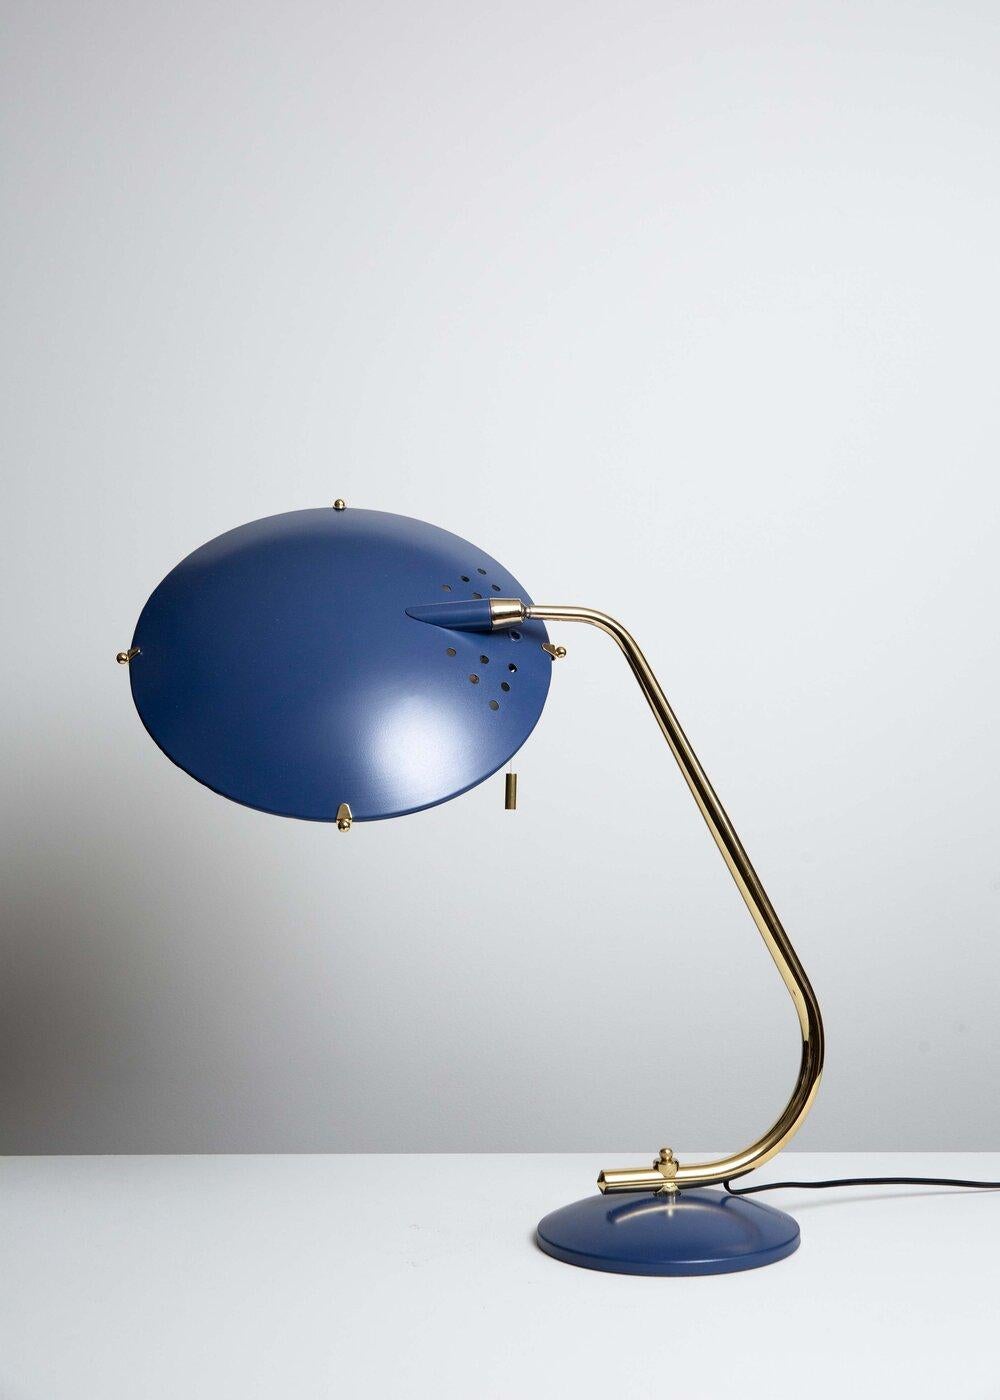 Jacques Biny attributed Jupiter desk lamp manufactured in the 1950s. Royal blue enamel on pierced aluminium saucer shade with brass clips, brass plated steel pivot, pull cord with brass trim, pivoting brass plated steel stem on royal blue steel